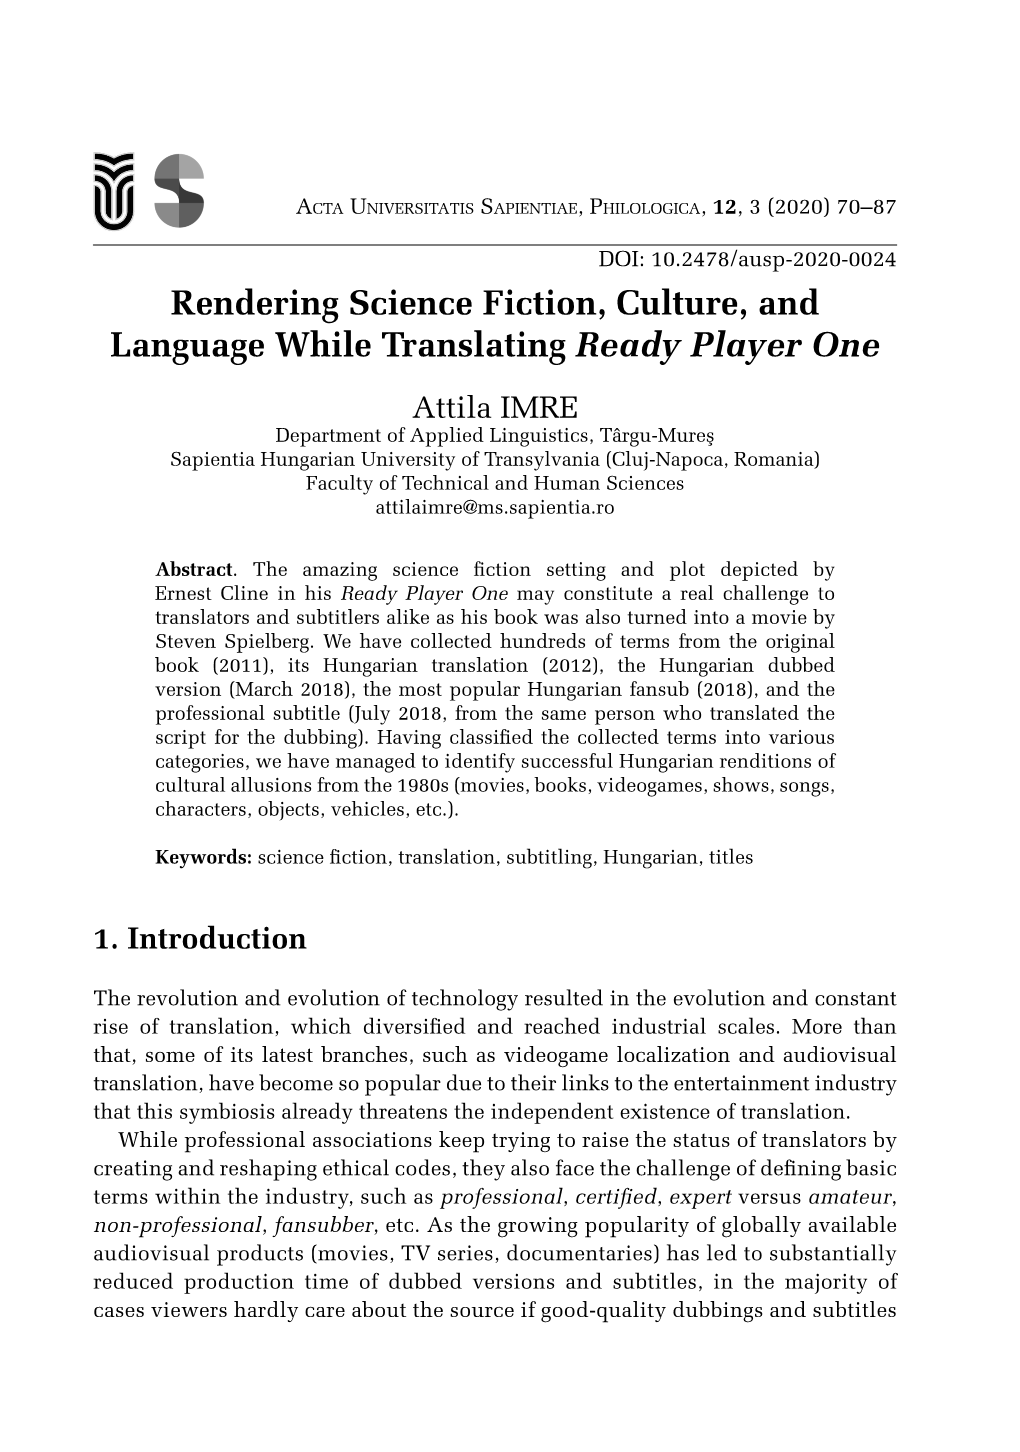 Rendering Science Fiction, Culture, and Language While Translating